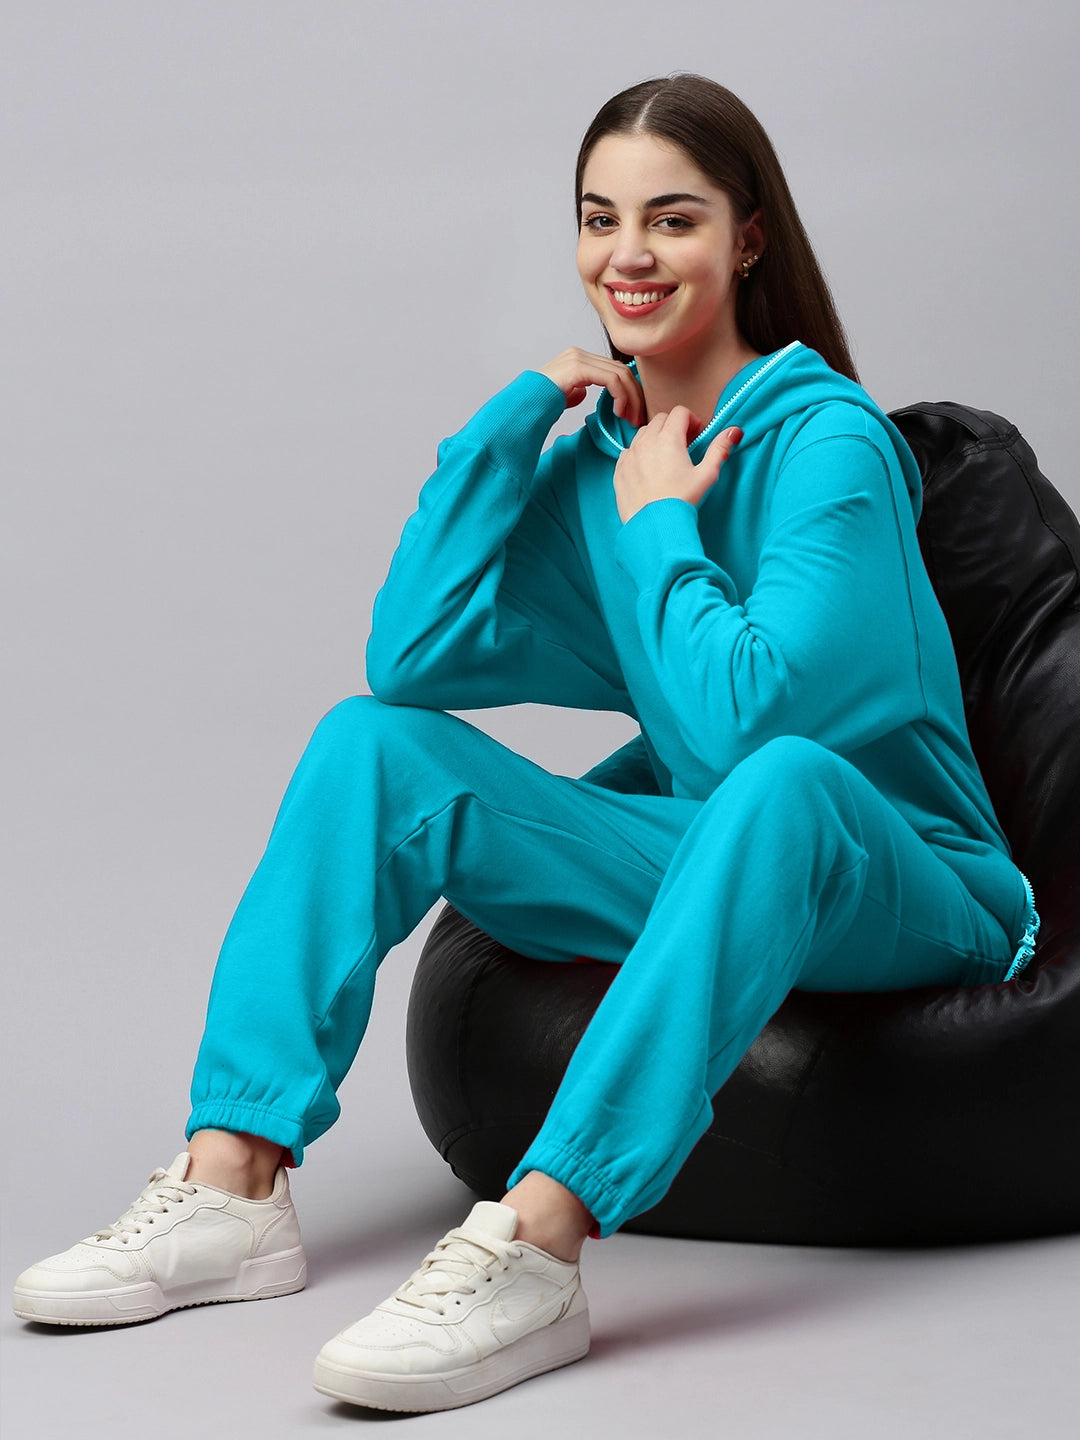 files/Geelee-der-ultimative-jumpsuit-from-organic-cotton_recycled-polyester-lookshot-blue-bay.webp